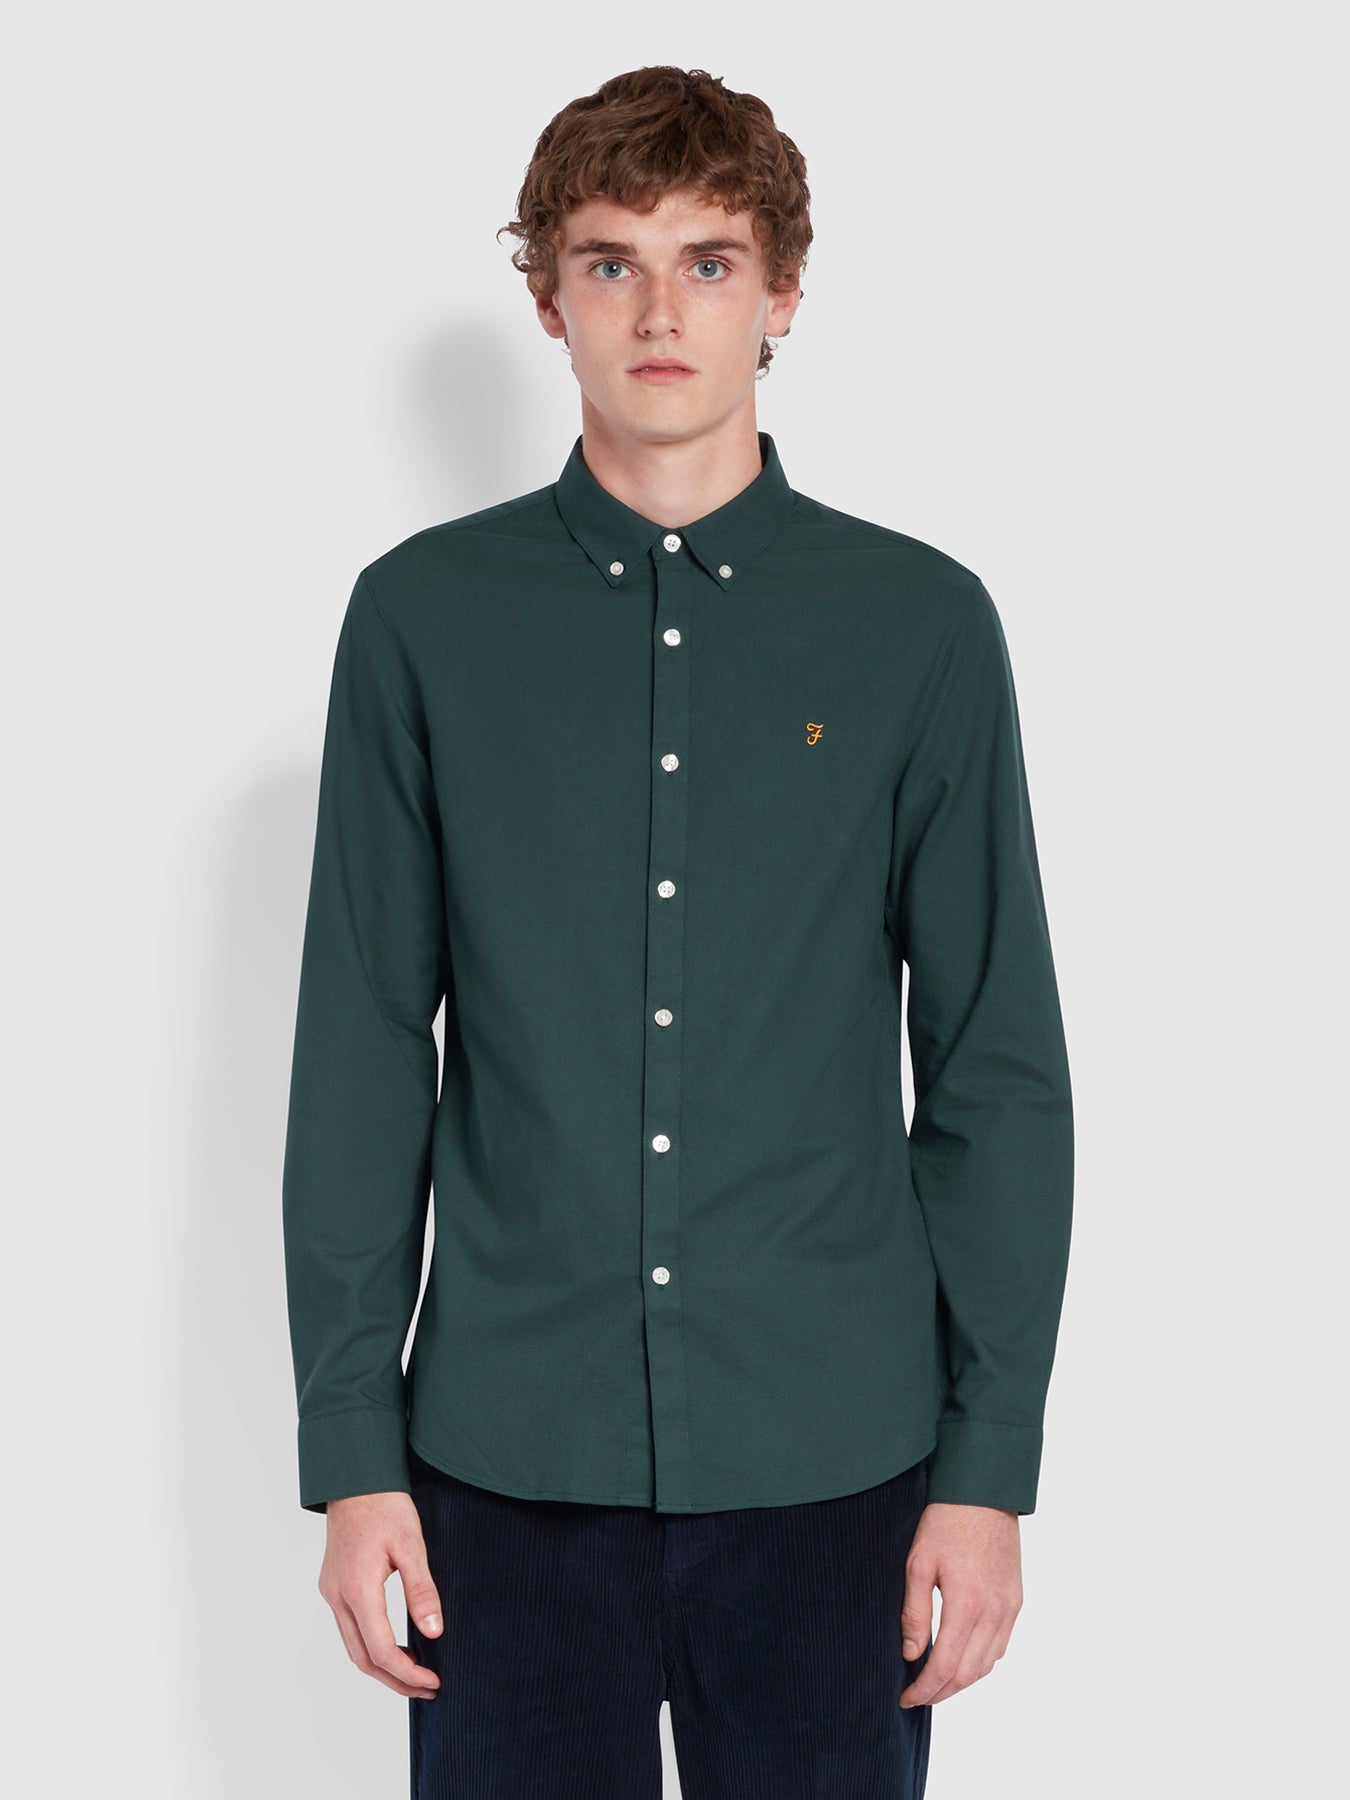 View Brewer Slim Fit Organic Cotton Oxford Shirt In Farah Forest Green information